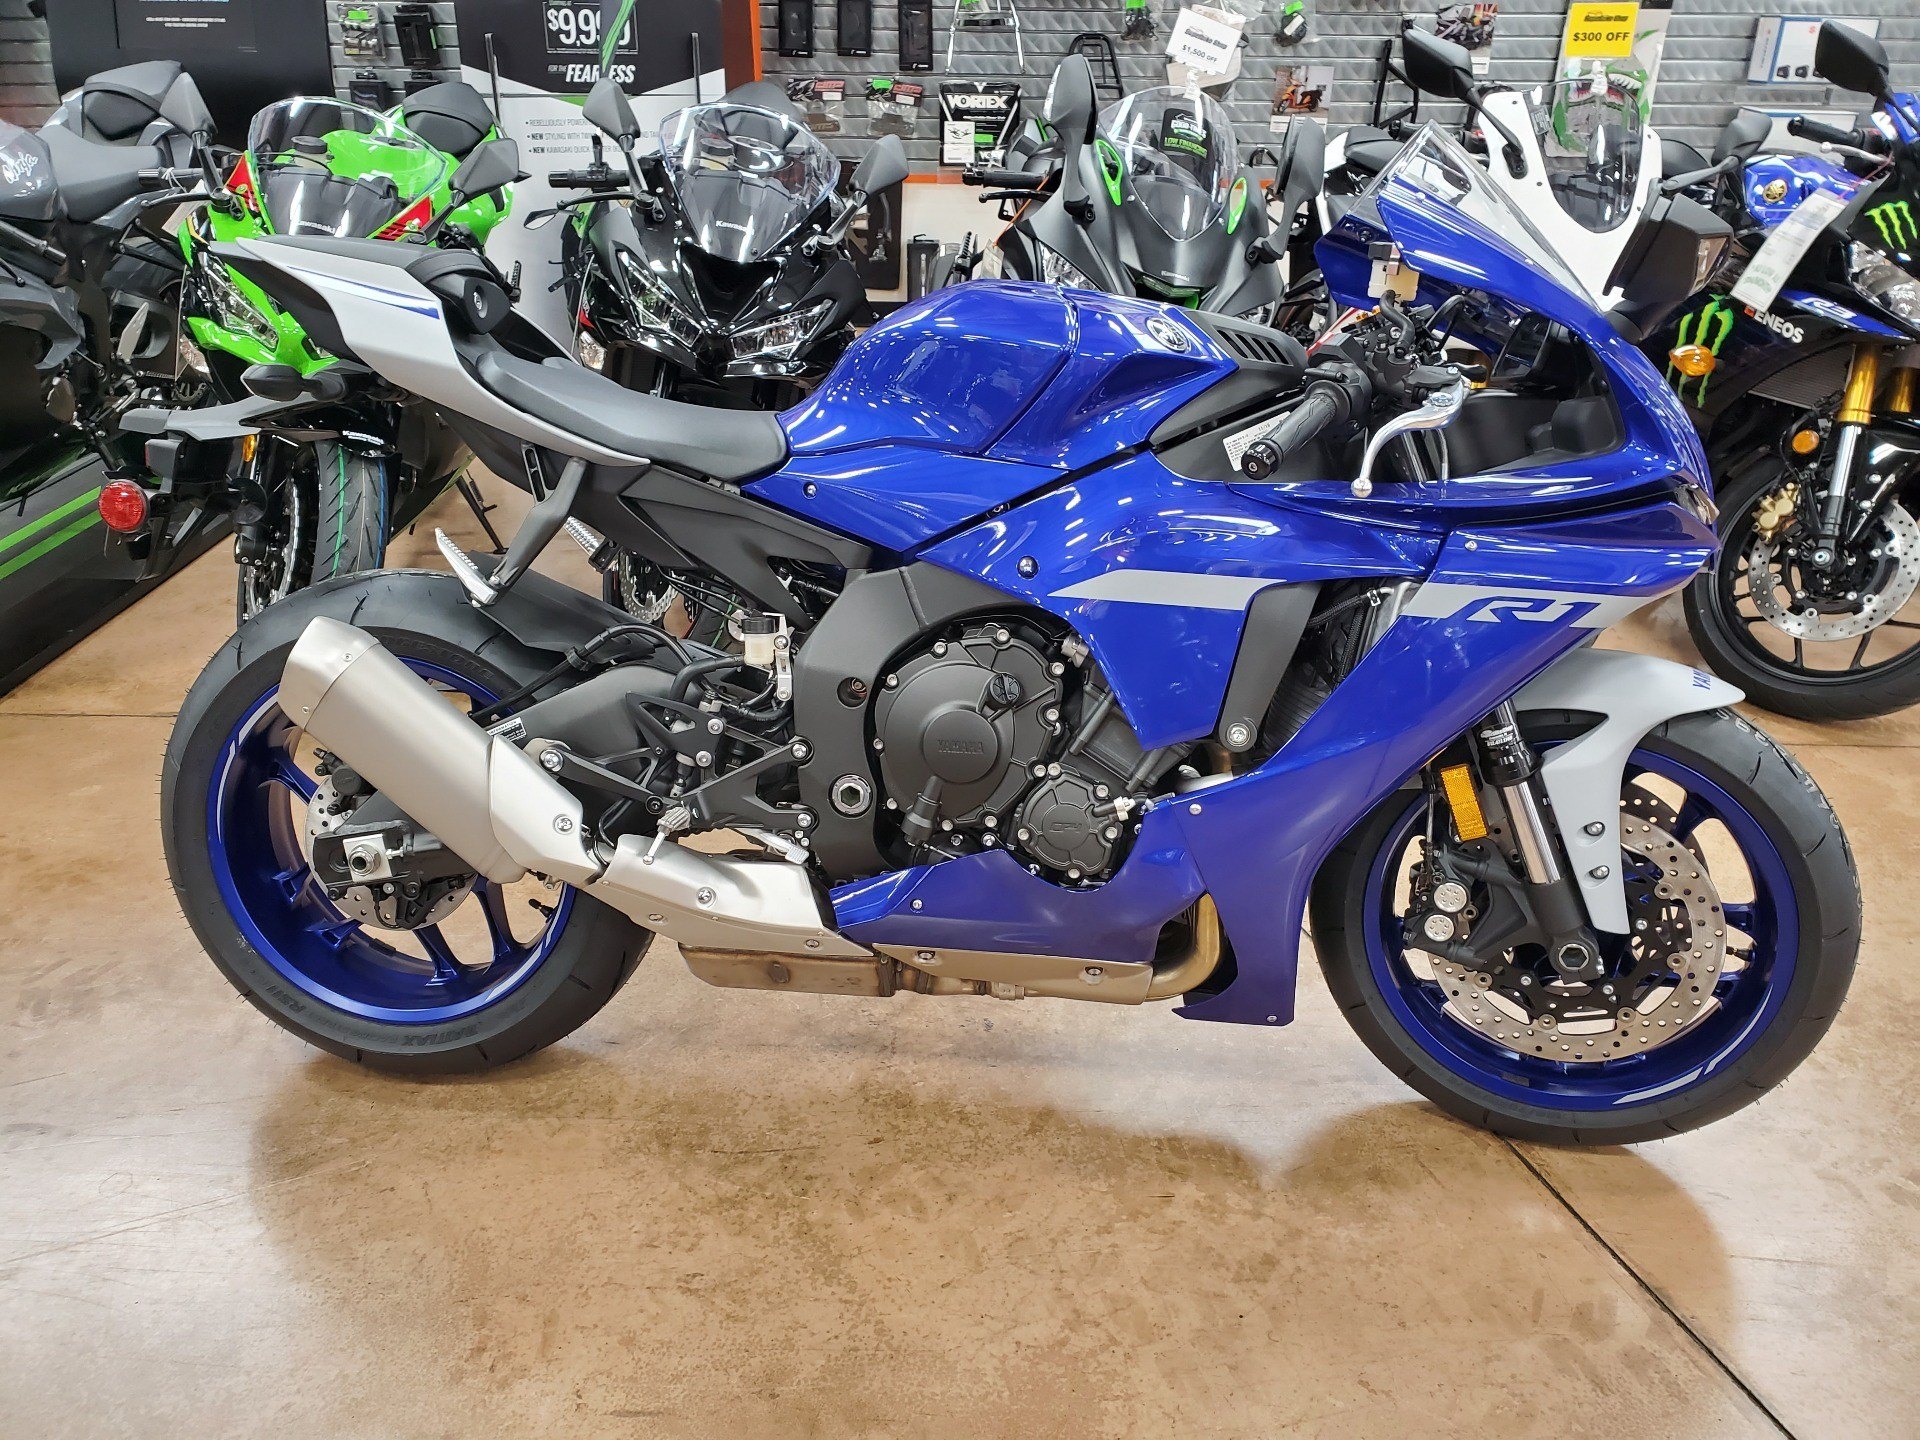 New 2020 Yamaha YZF-R1 Motorcycles in Evansville, IN ...